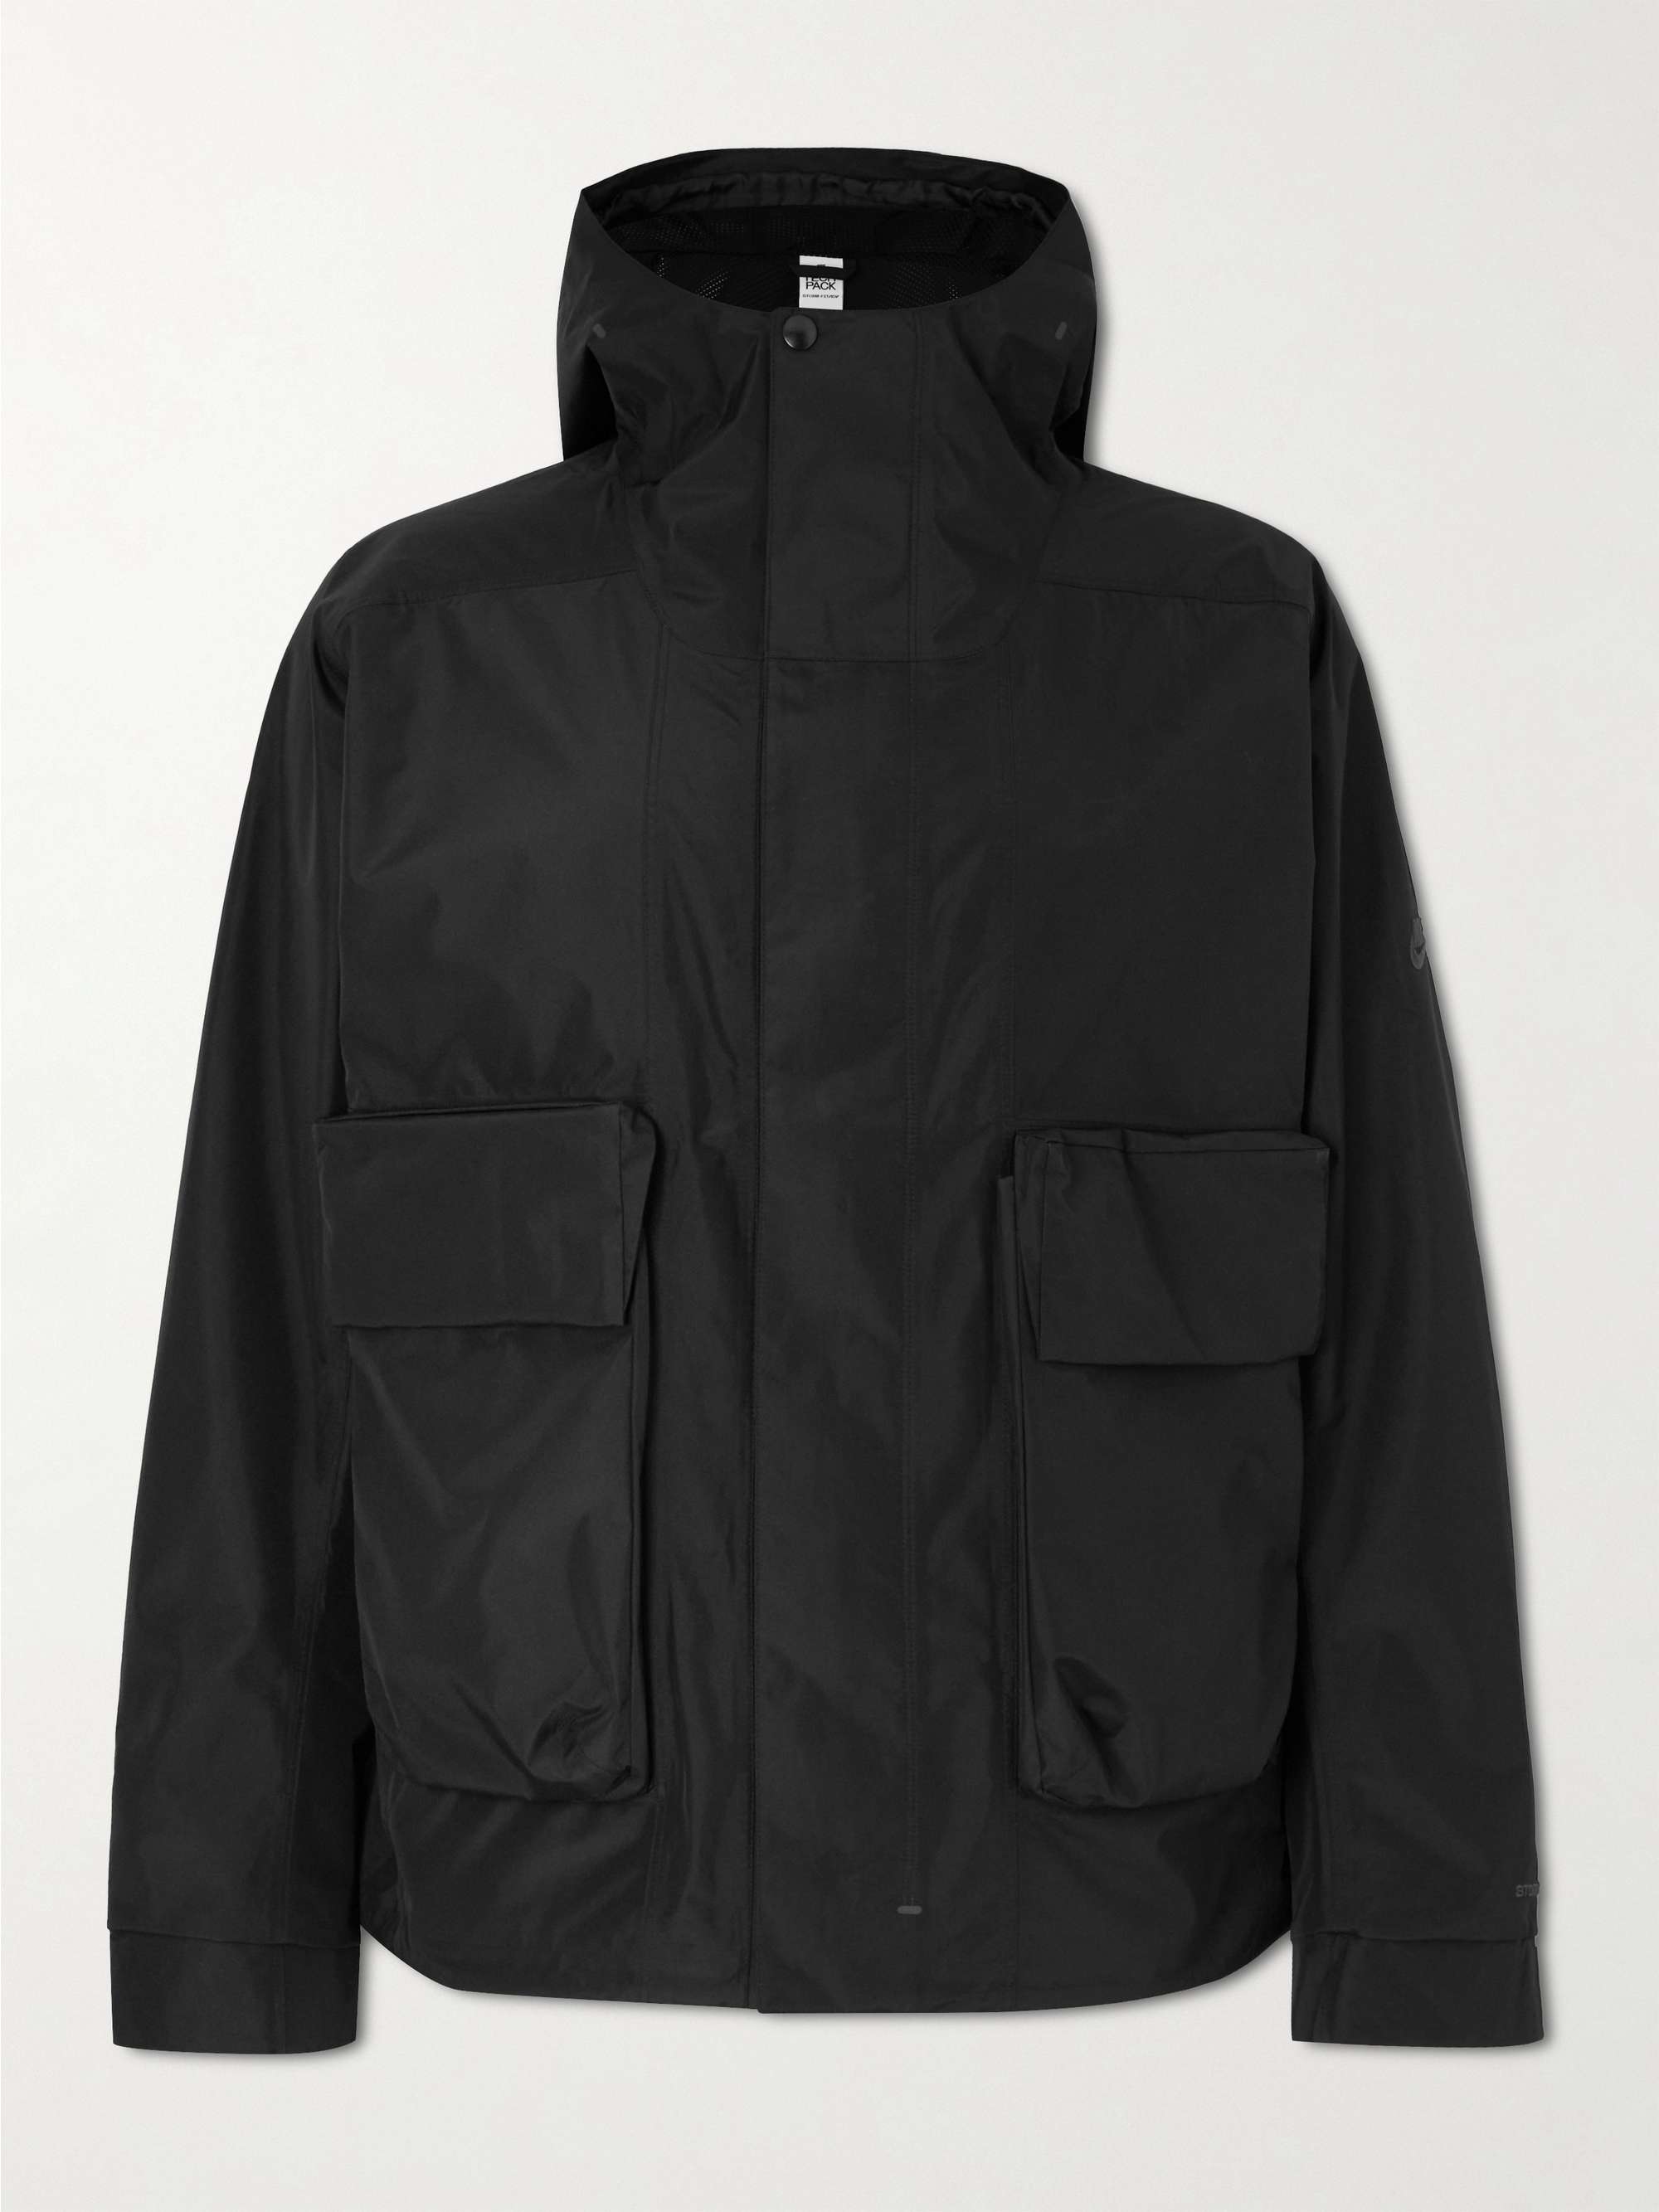 NIKE Storm-FIT ADV GORE-TEX® Hooded Jacket | MR PORTER